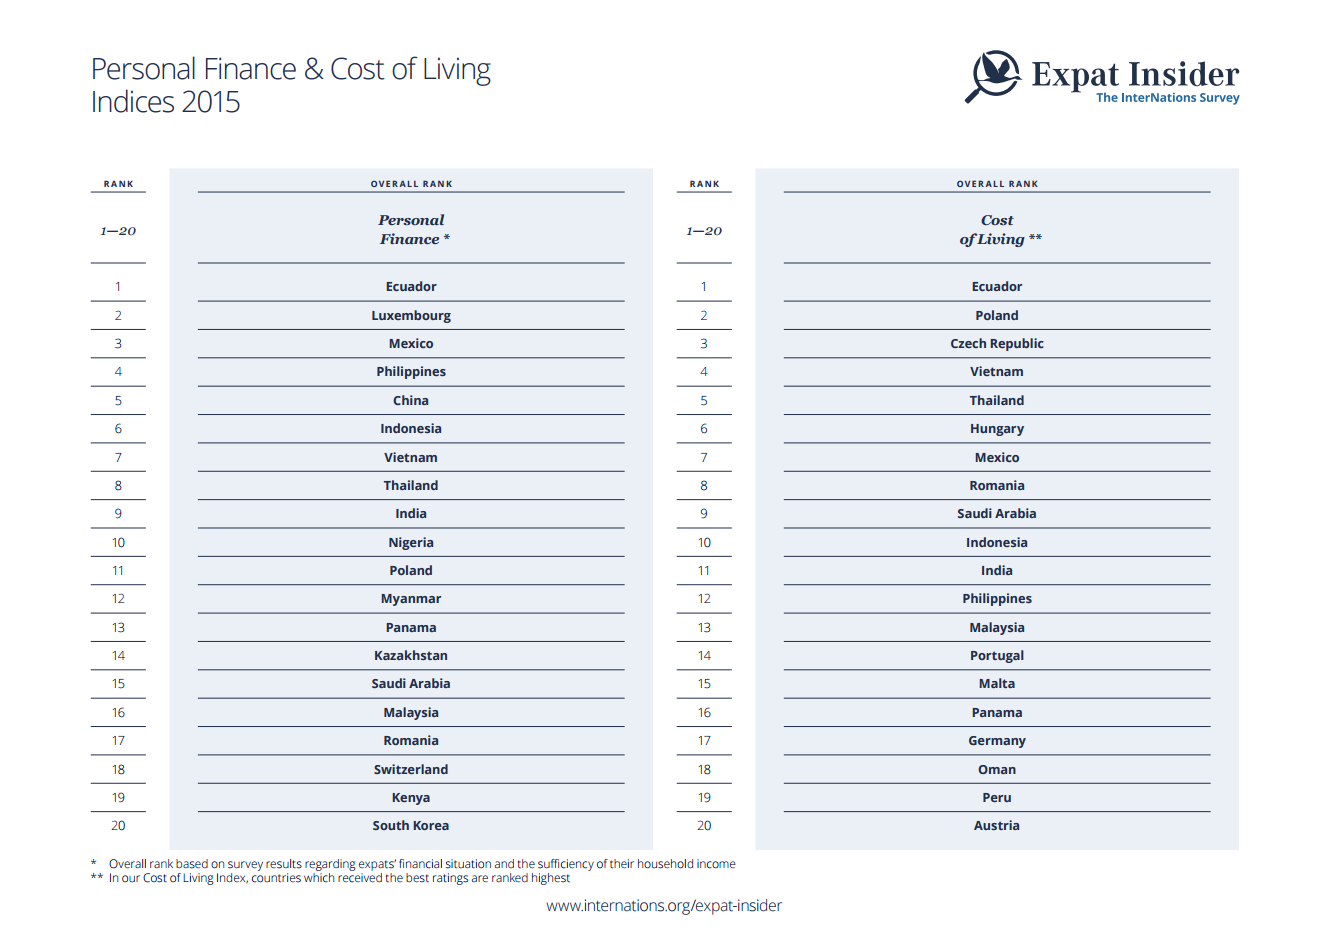 Personal Finance & Cost of Living Indices 2015